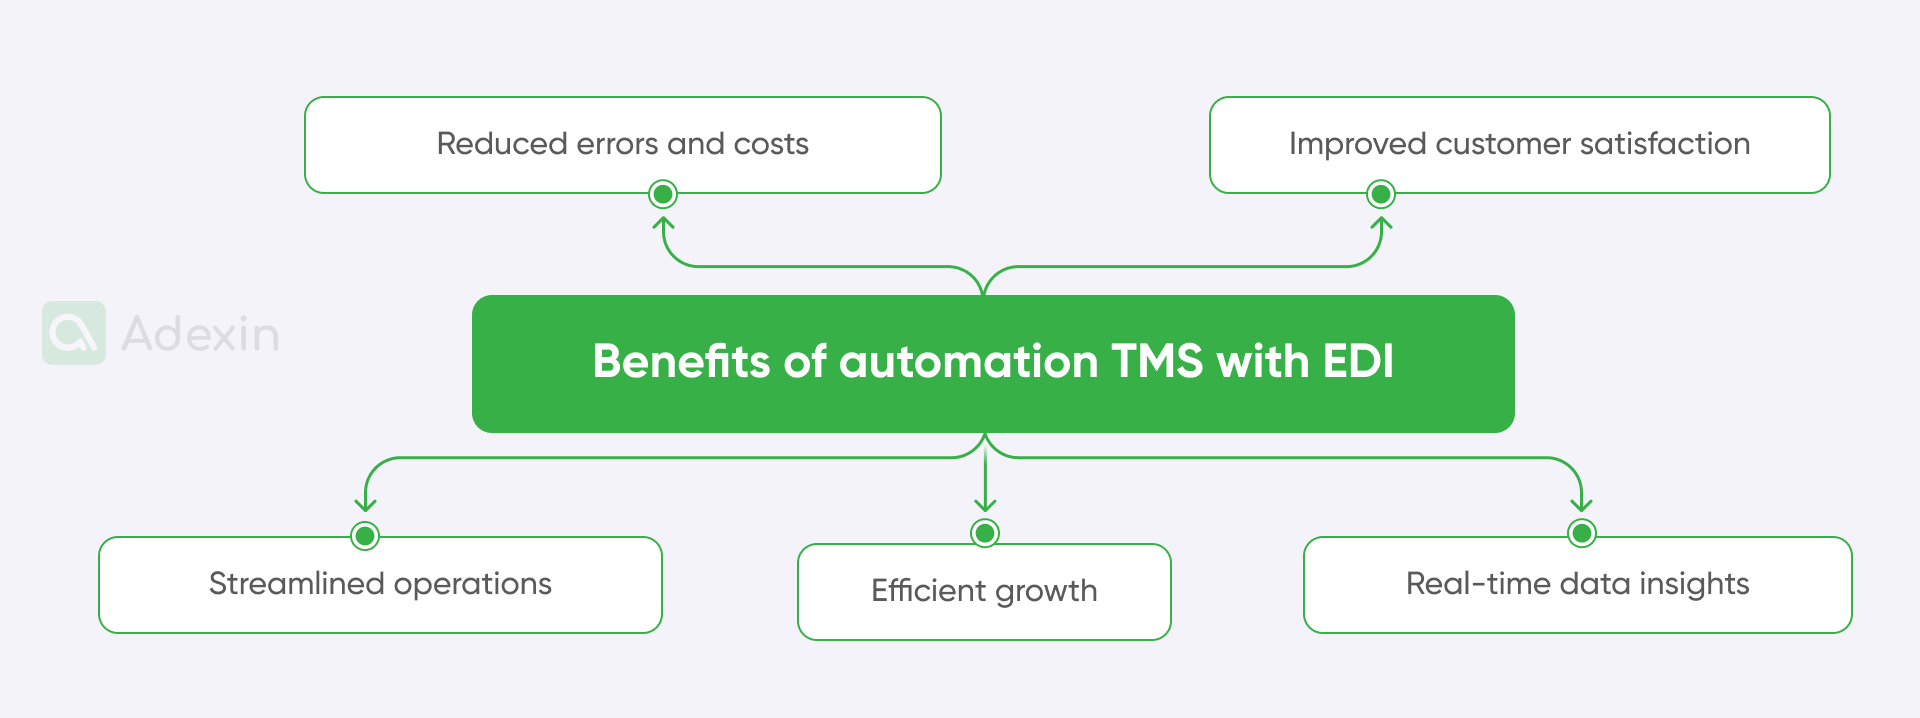 Benefits of automation TMS with EDI